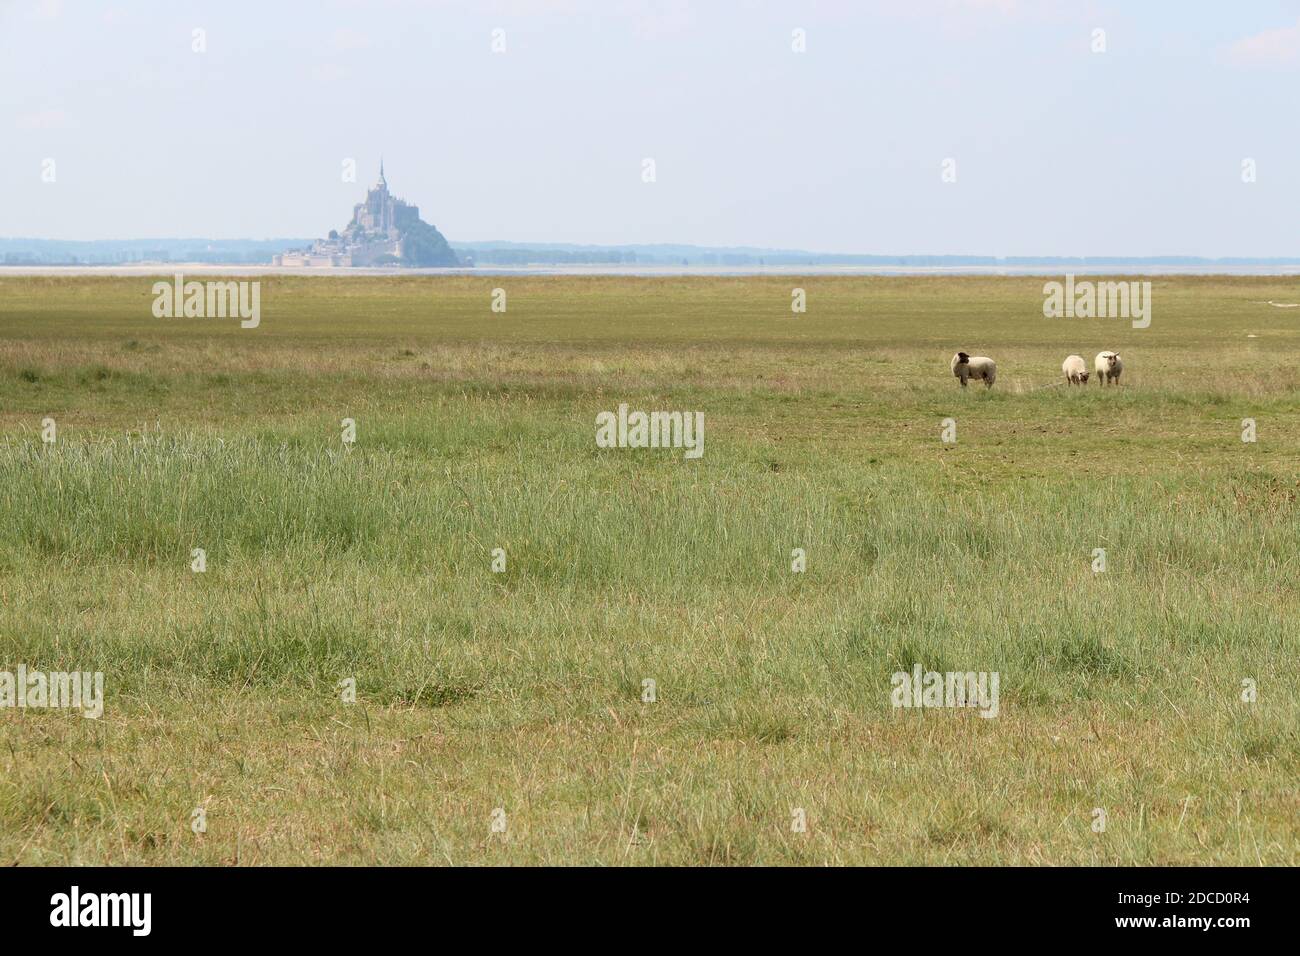 mont-saint-michel bay in normandy (france) Stock Photo